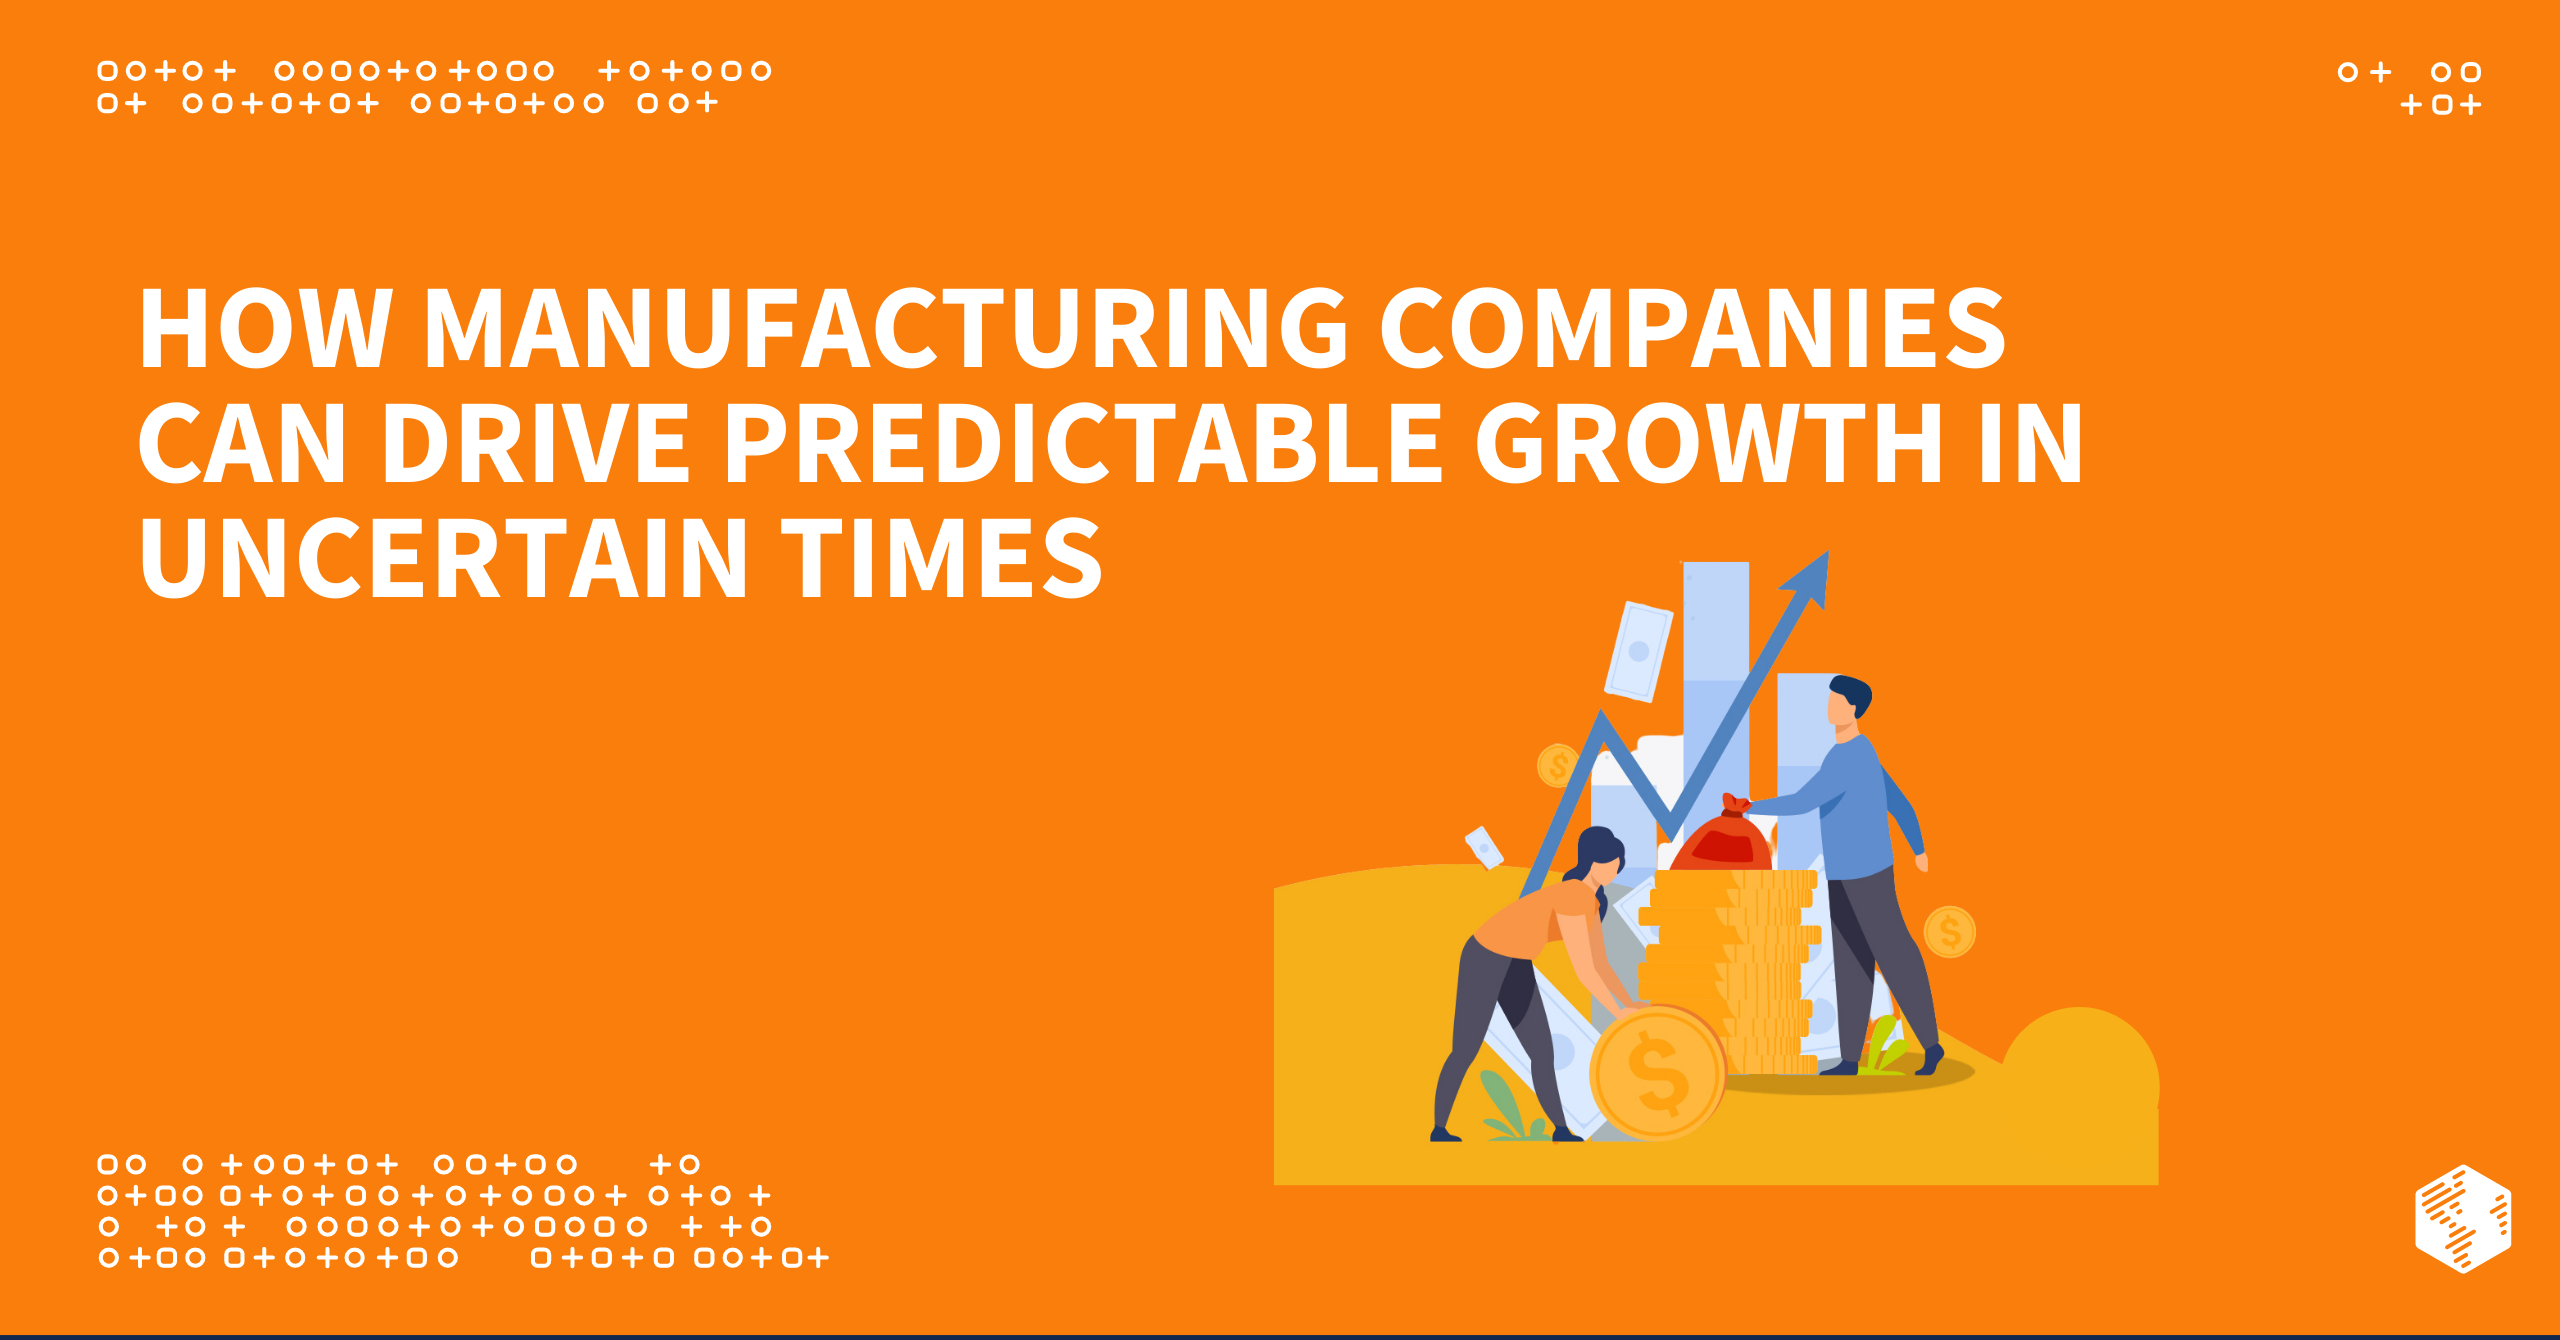 Predictable Growth for Manufacturing Companies